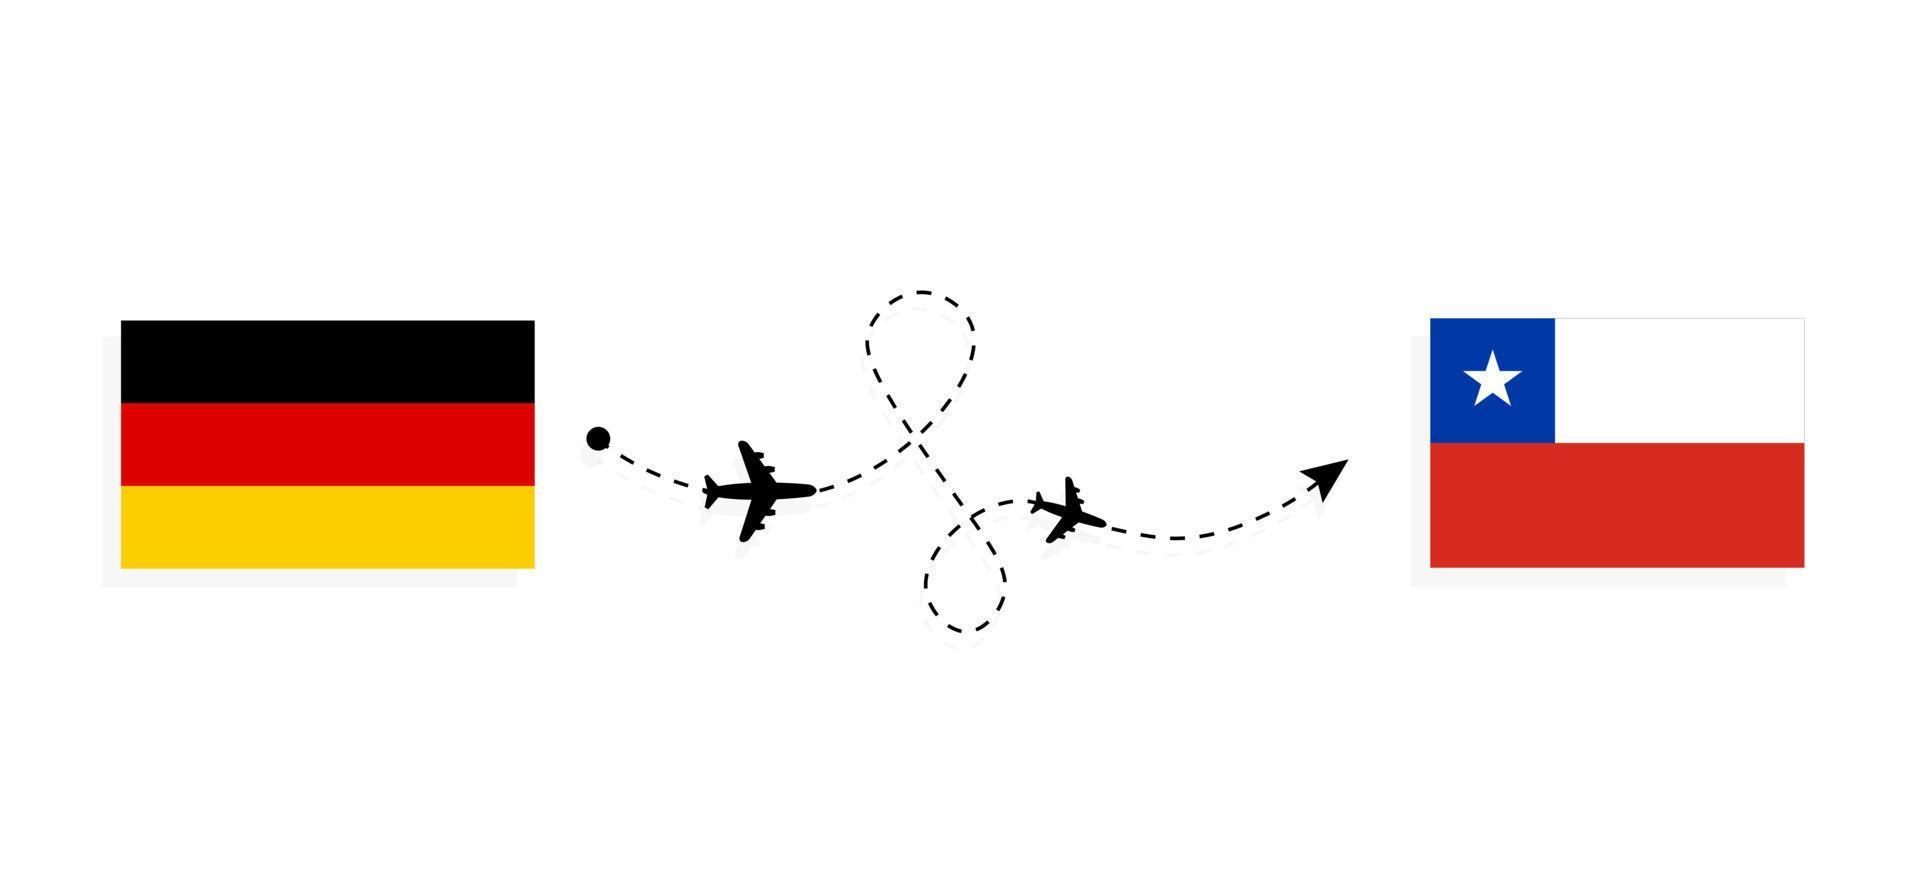 Flight and travel from Germany to Chile by passenger airplane Travel concept vector